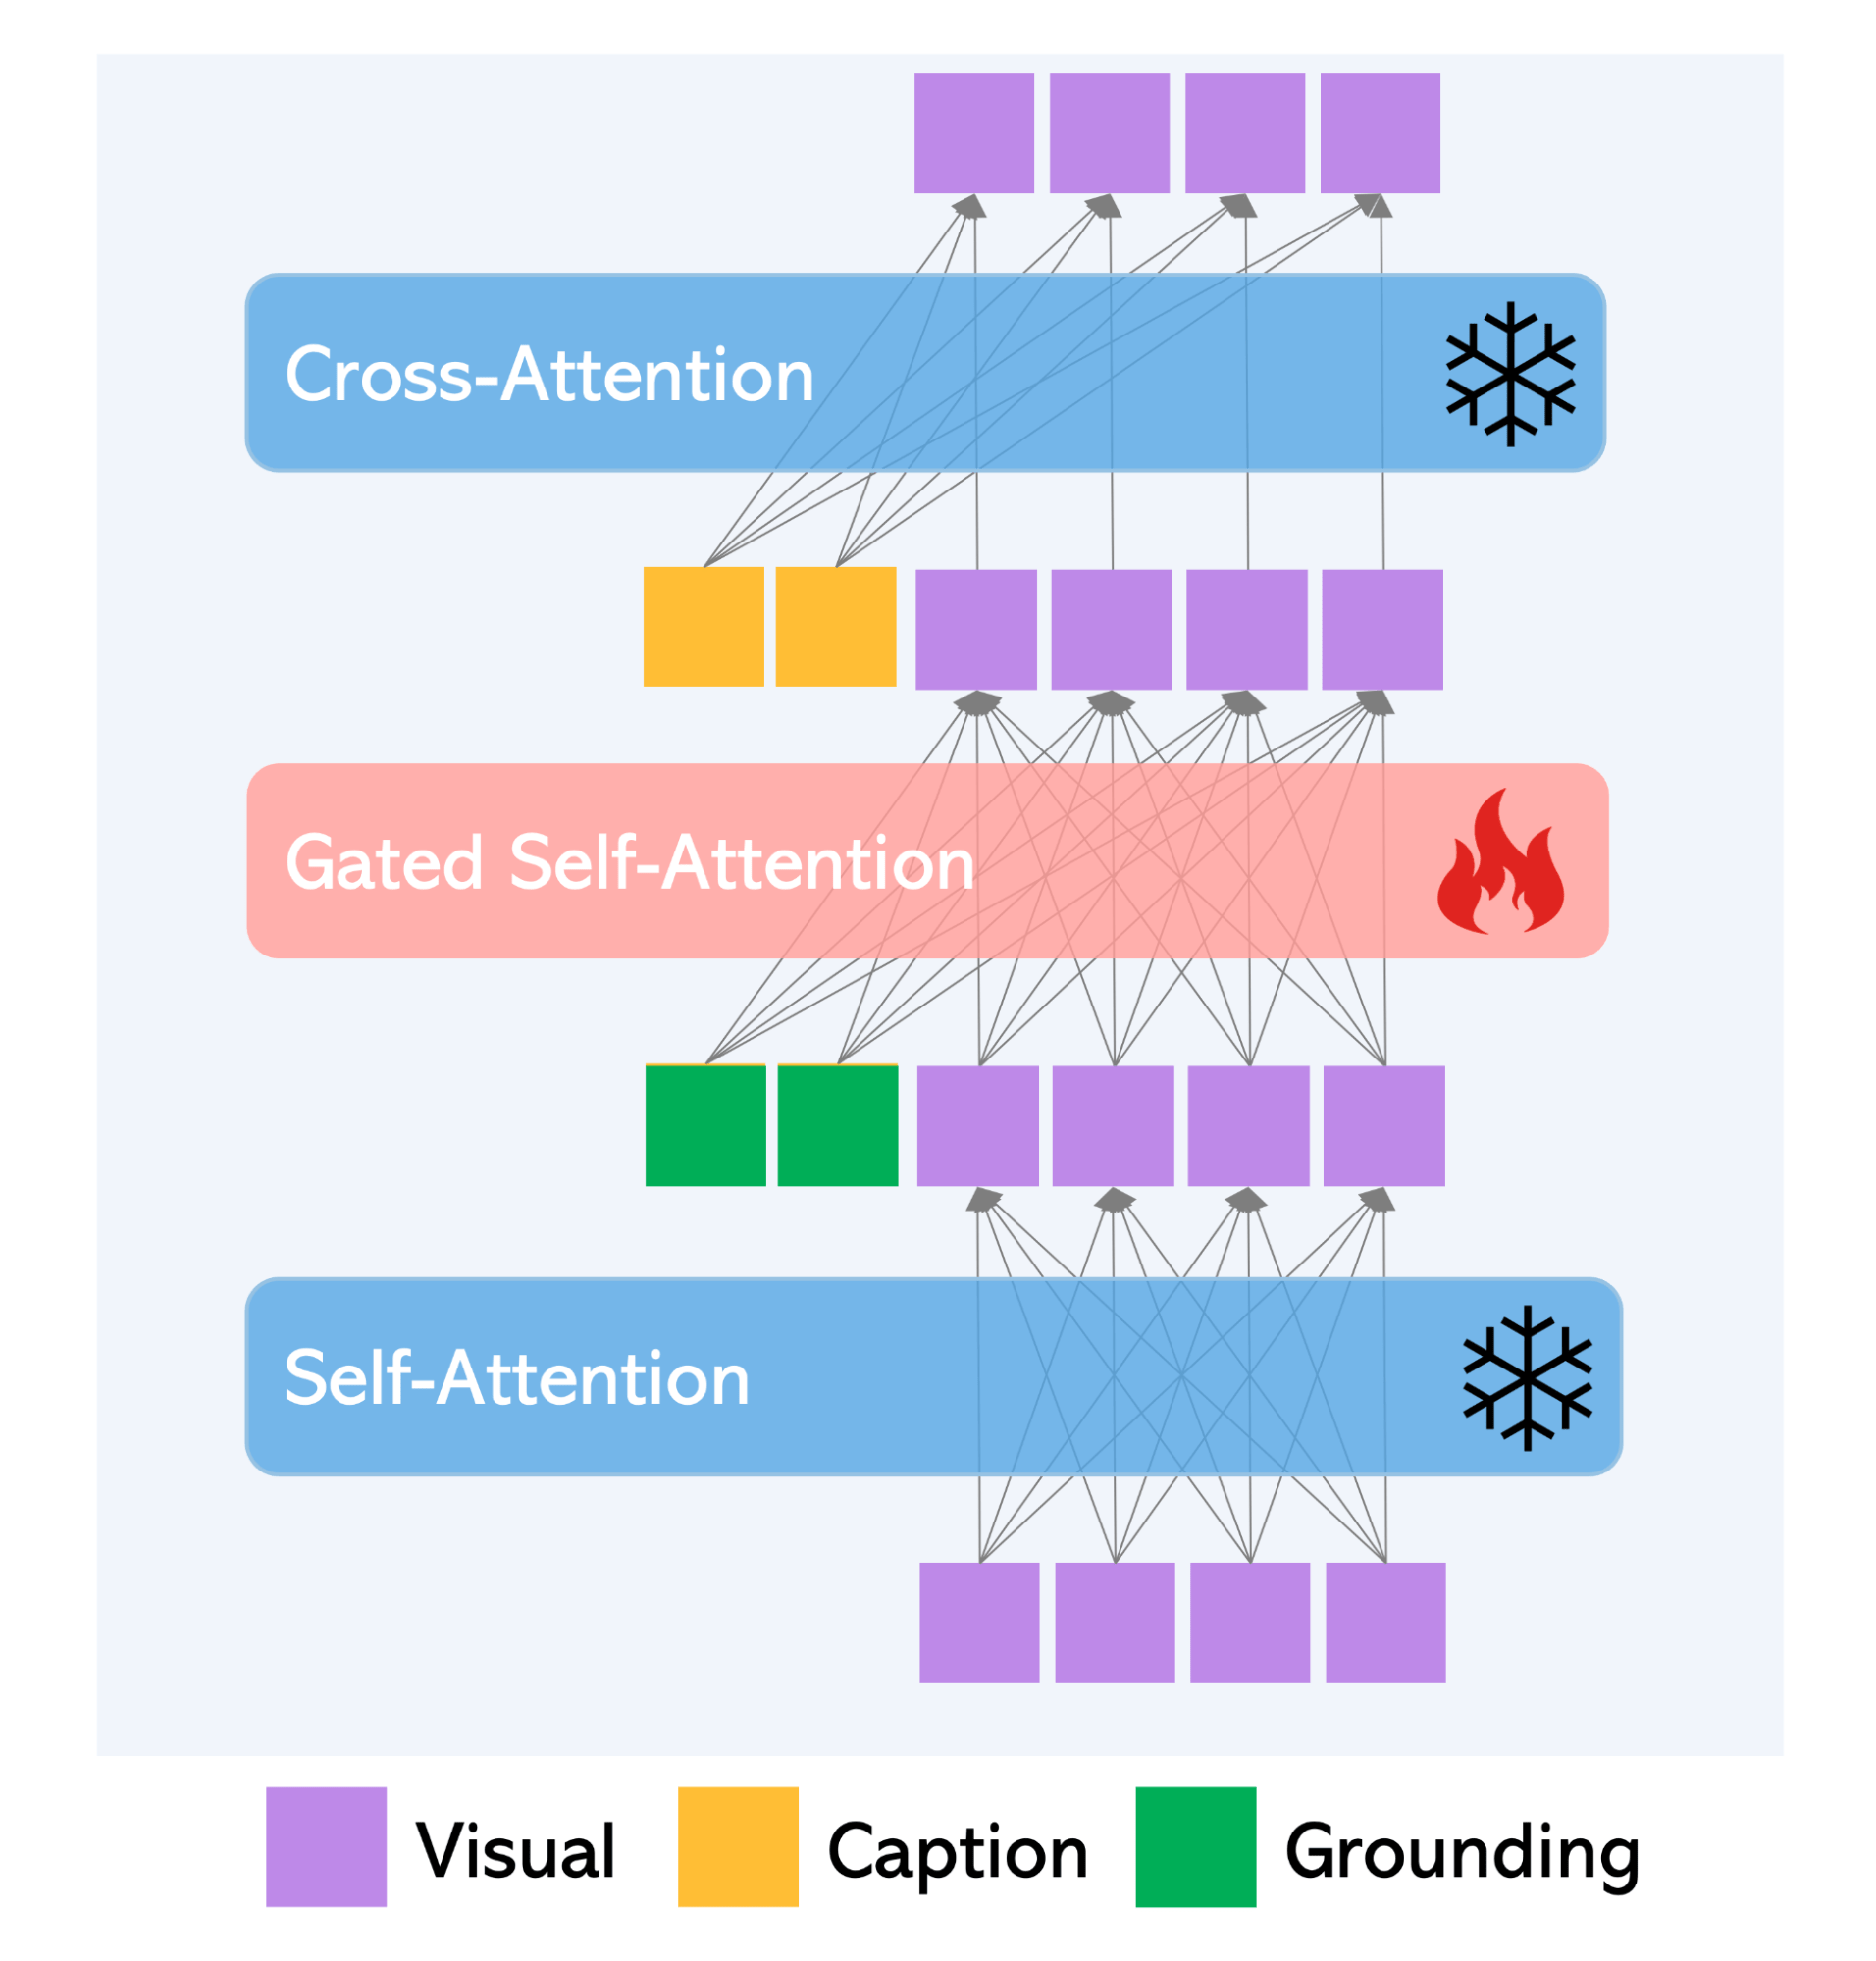 Figure 3 - Gated Self-Attention layer from the GLIGEN architecture